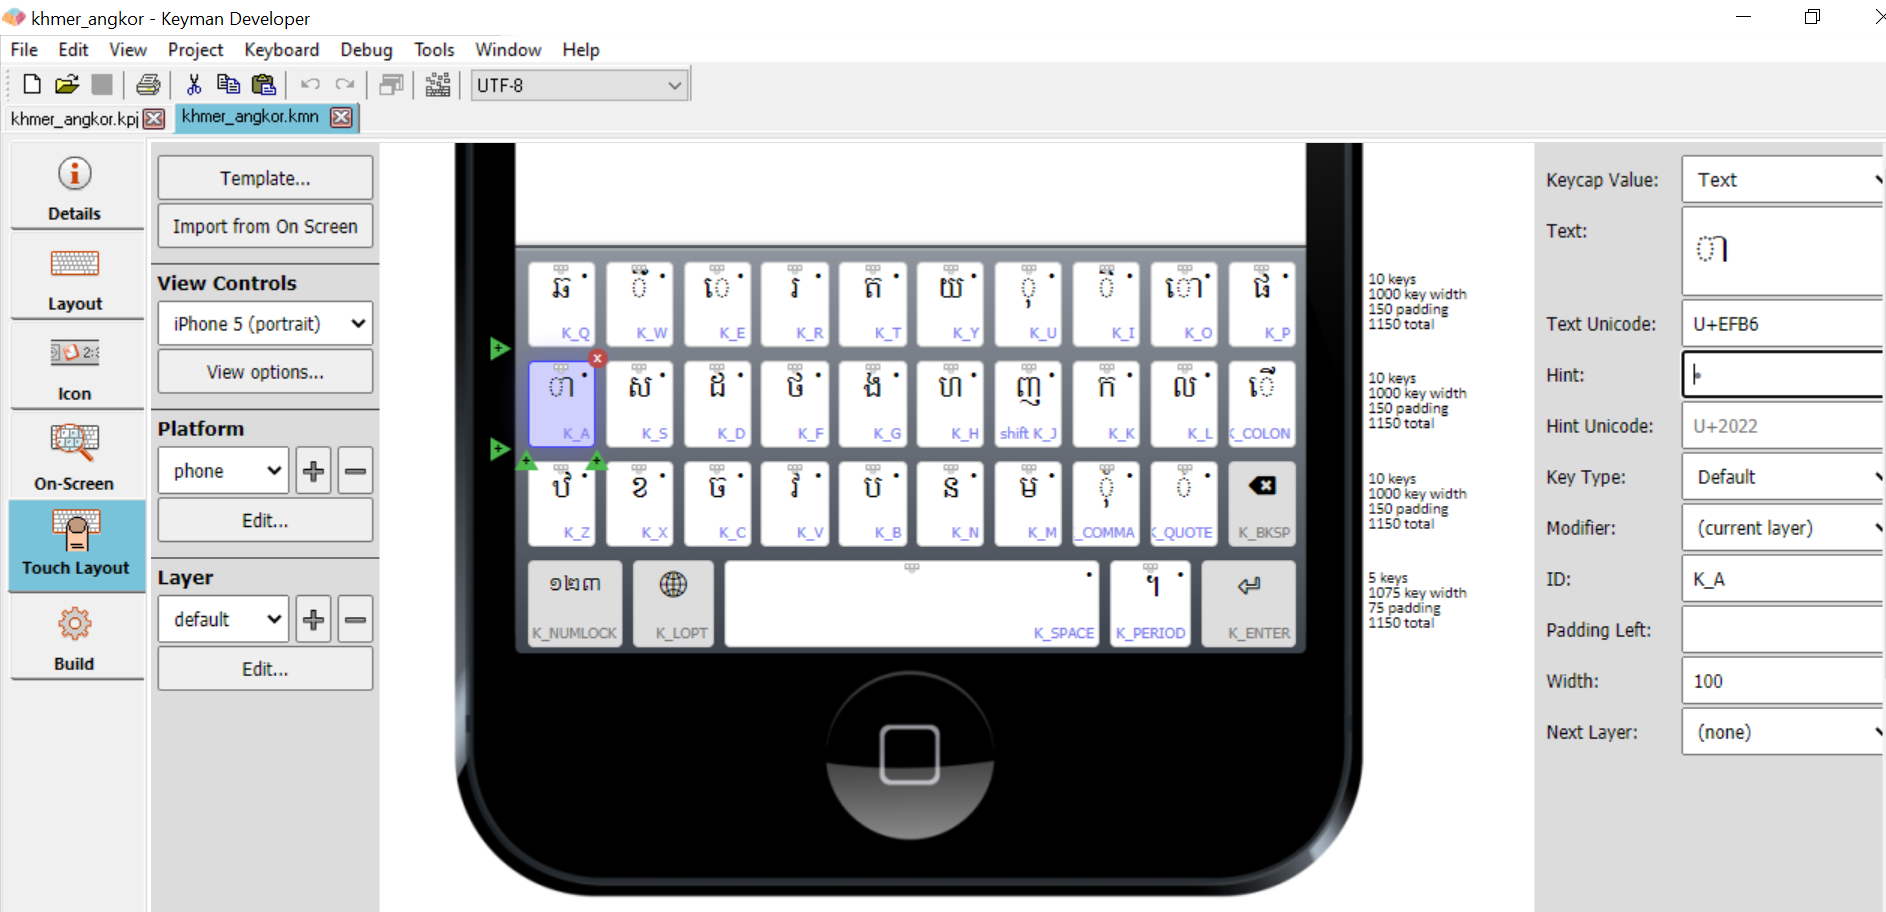 Keyboard Editor - Touch Layout tab, Design view